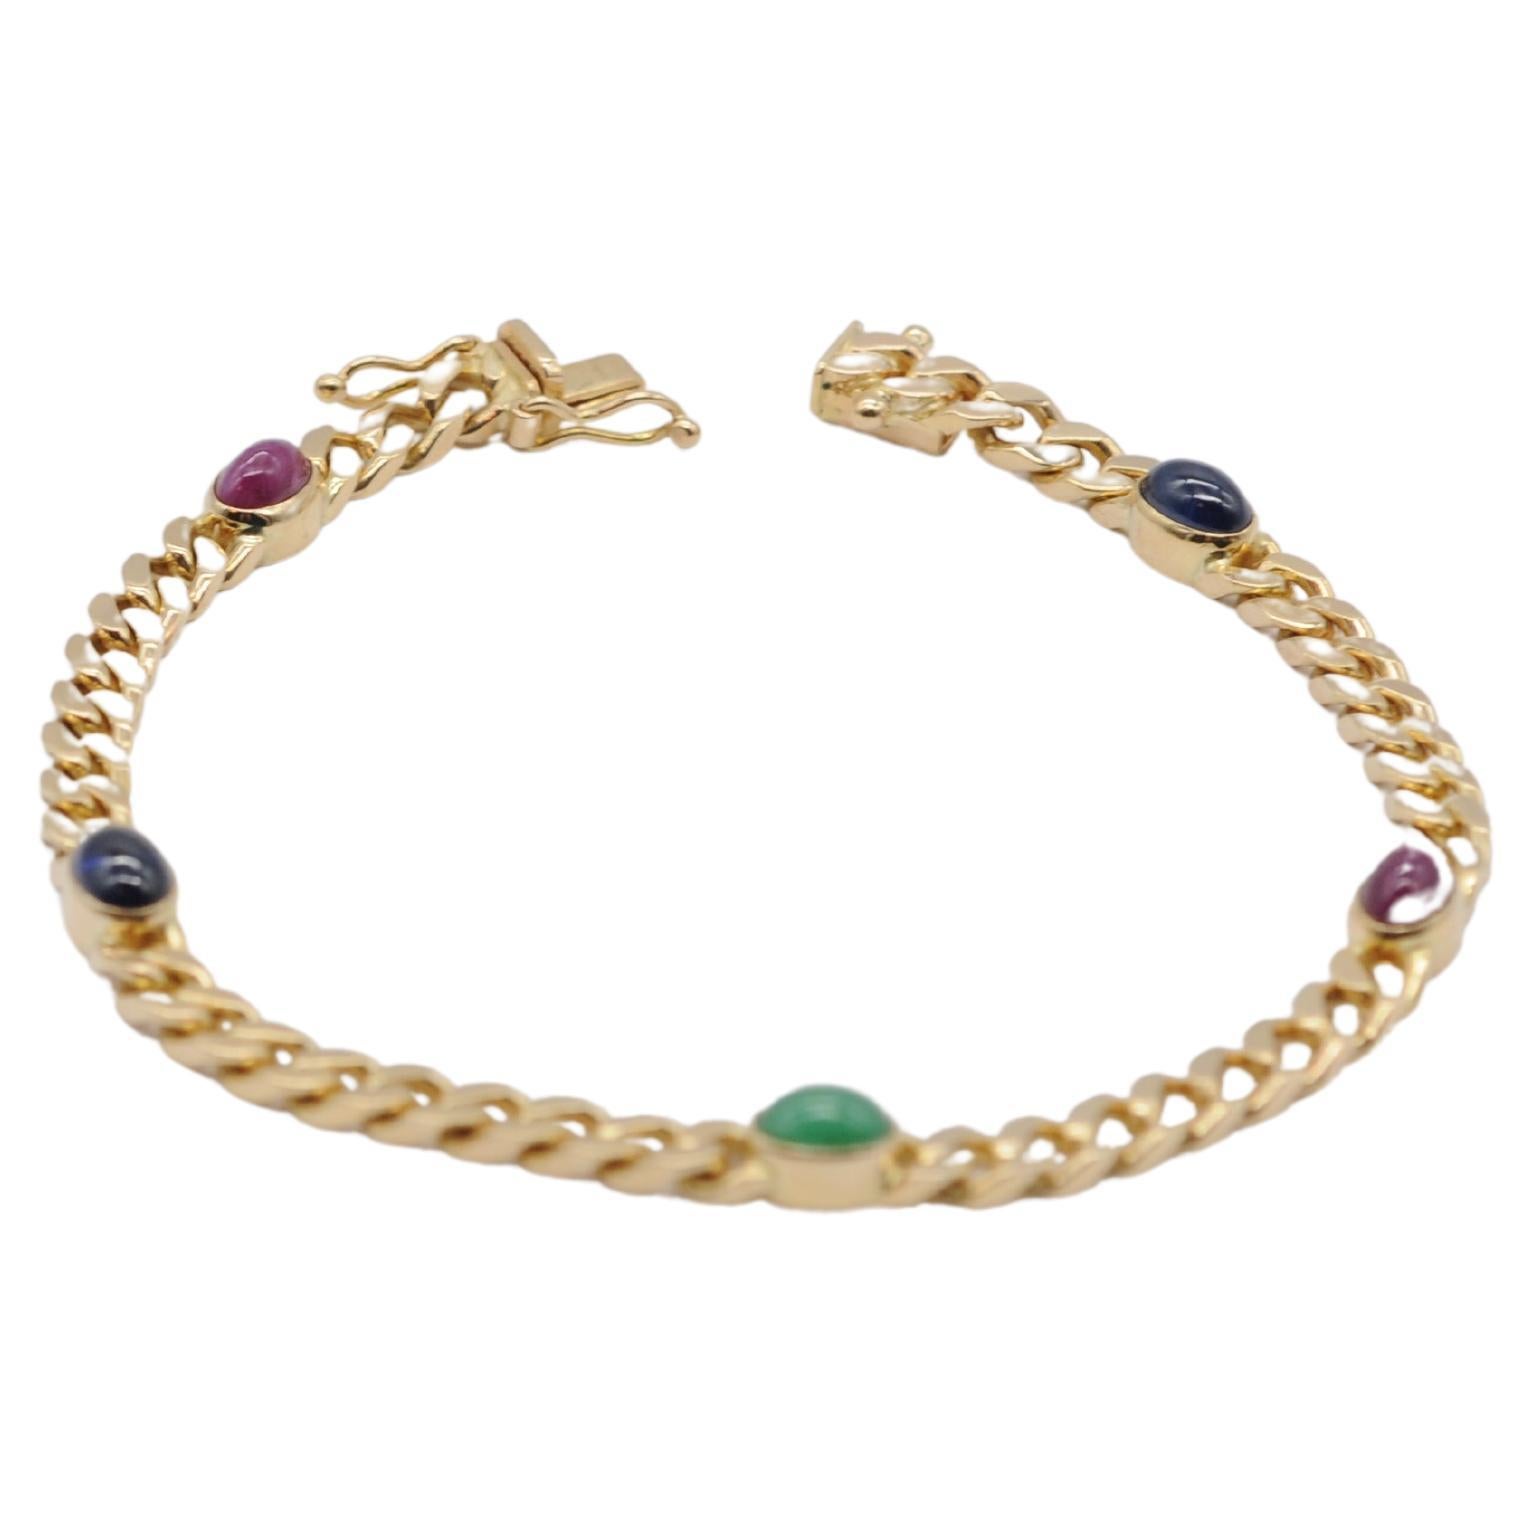 Noble 14k yellow gold bracelet with cabochon For Sale 6